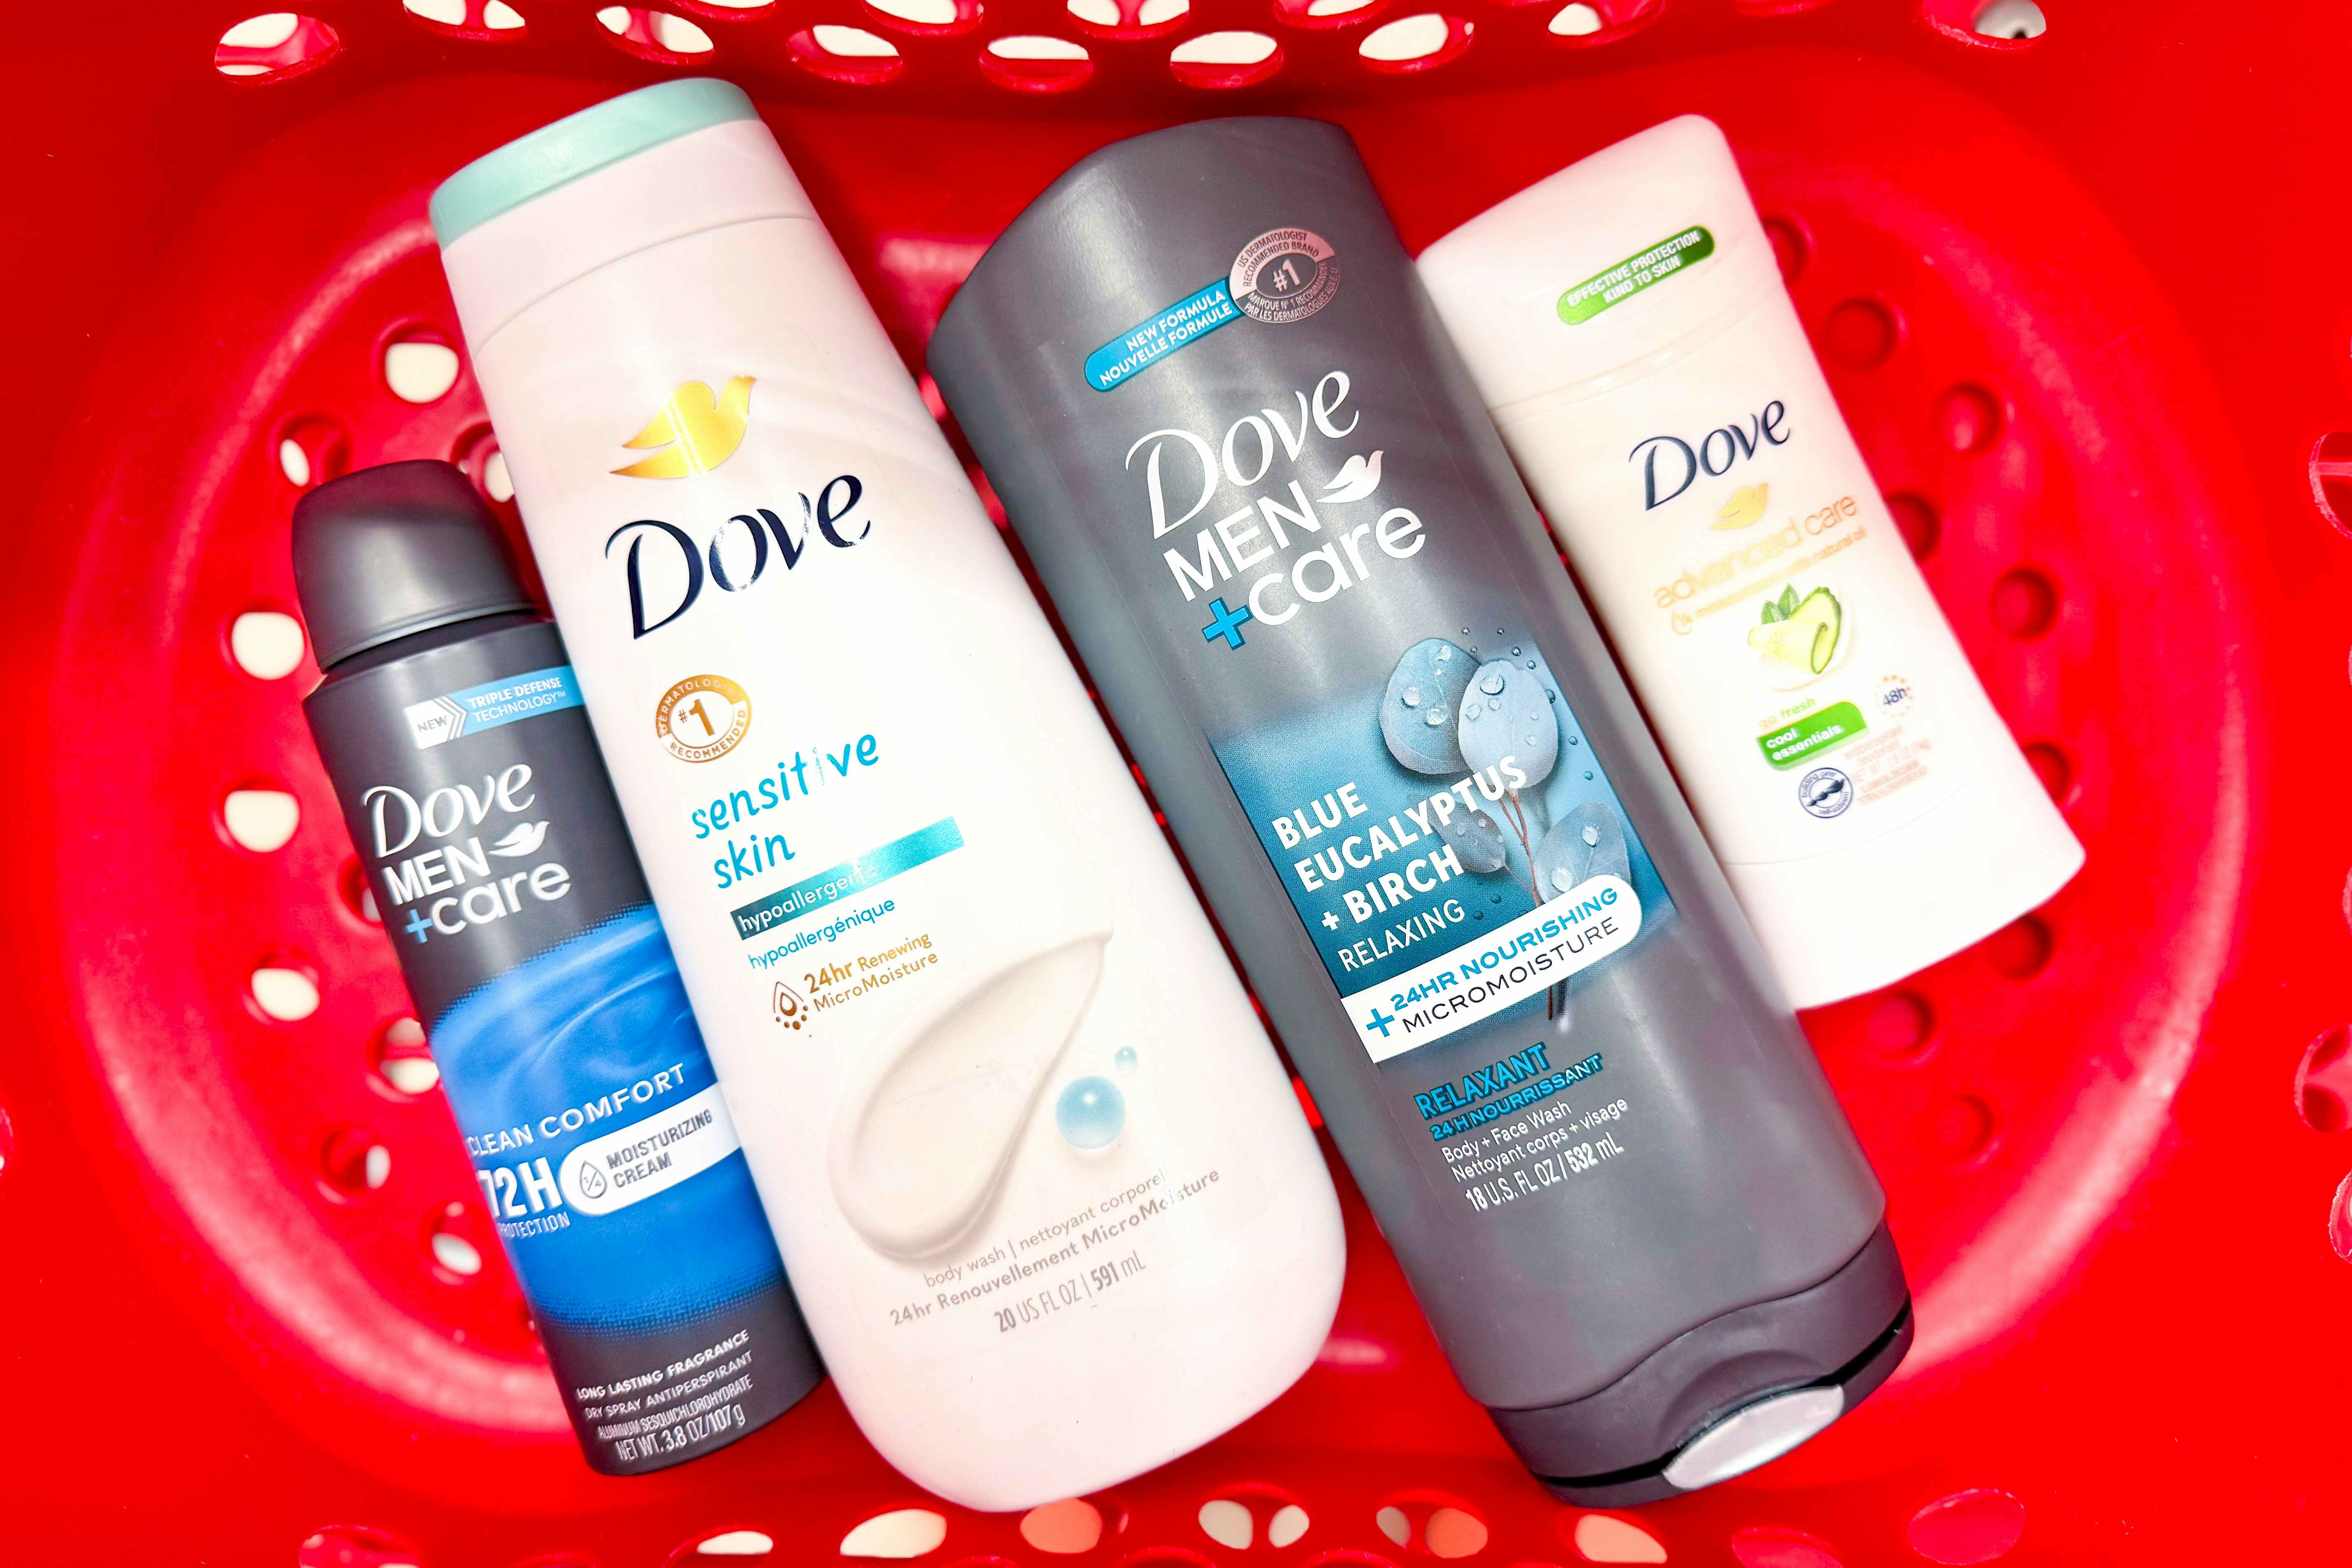 Dove Body Wash and Deodorant for Just $1 Each at Target